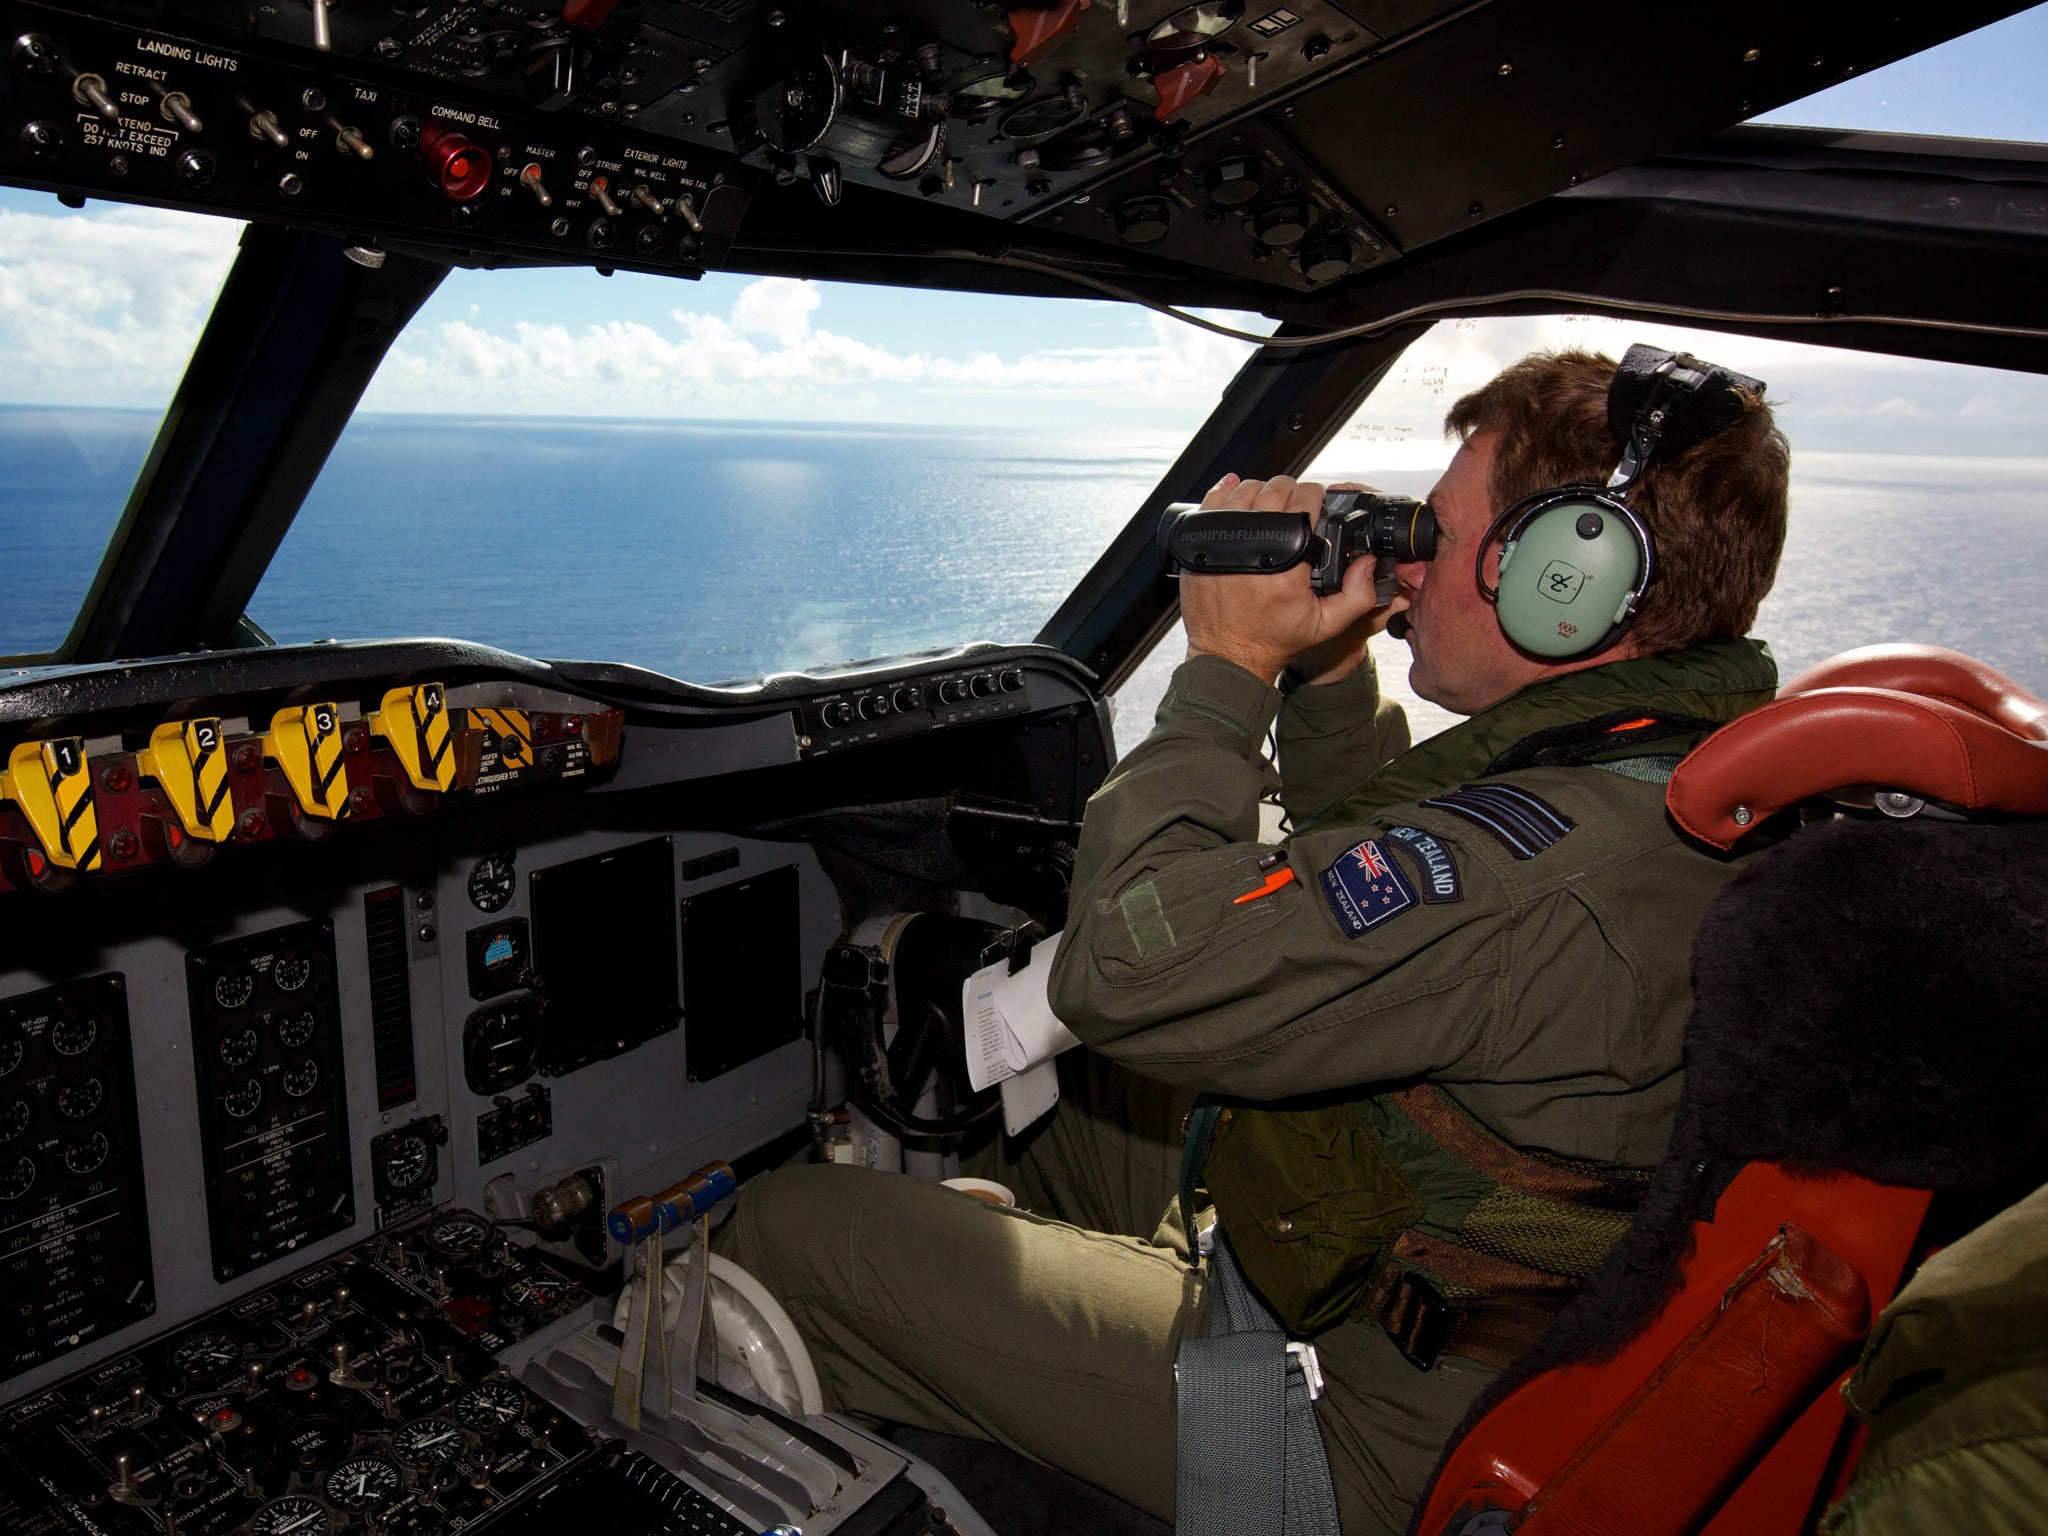 Royal New Zealand Air Force personnel  take part in the search to locate the missing Malaysia Airways Flight MH370 over the Indian Ocean